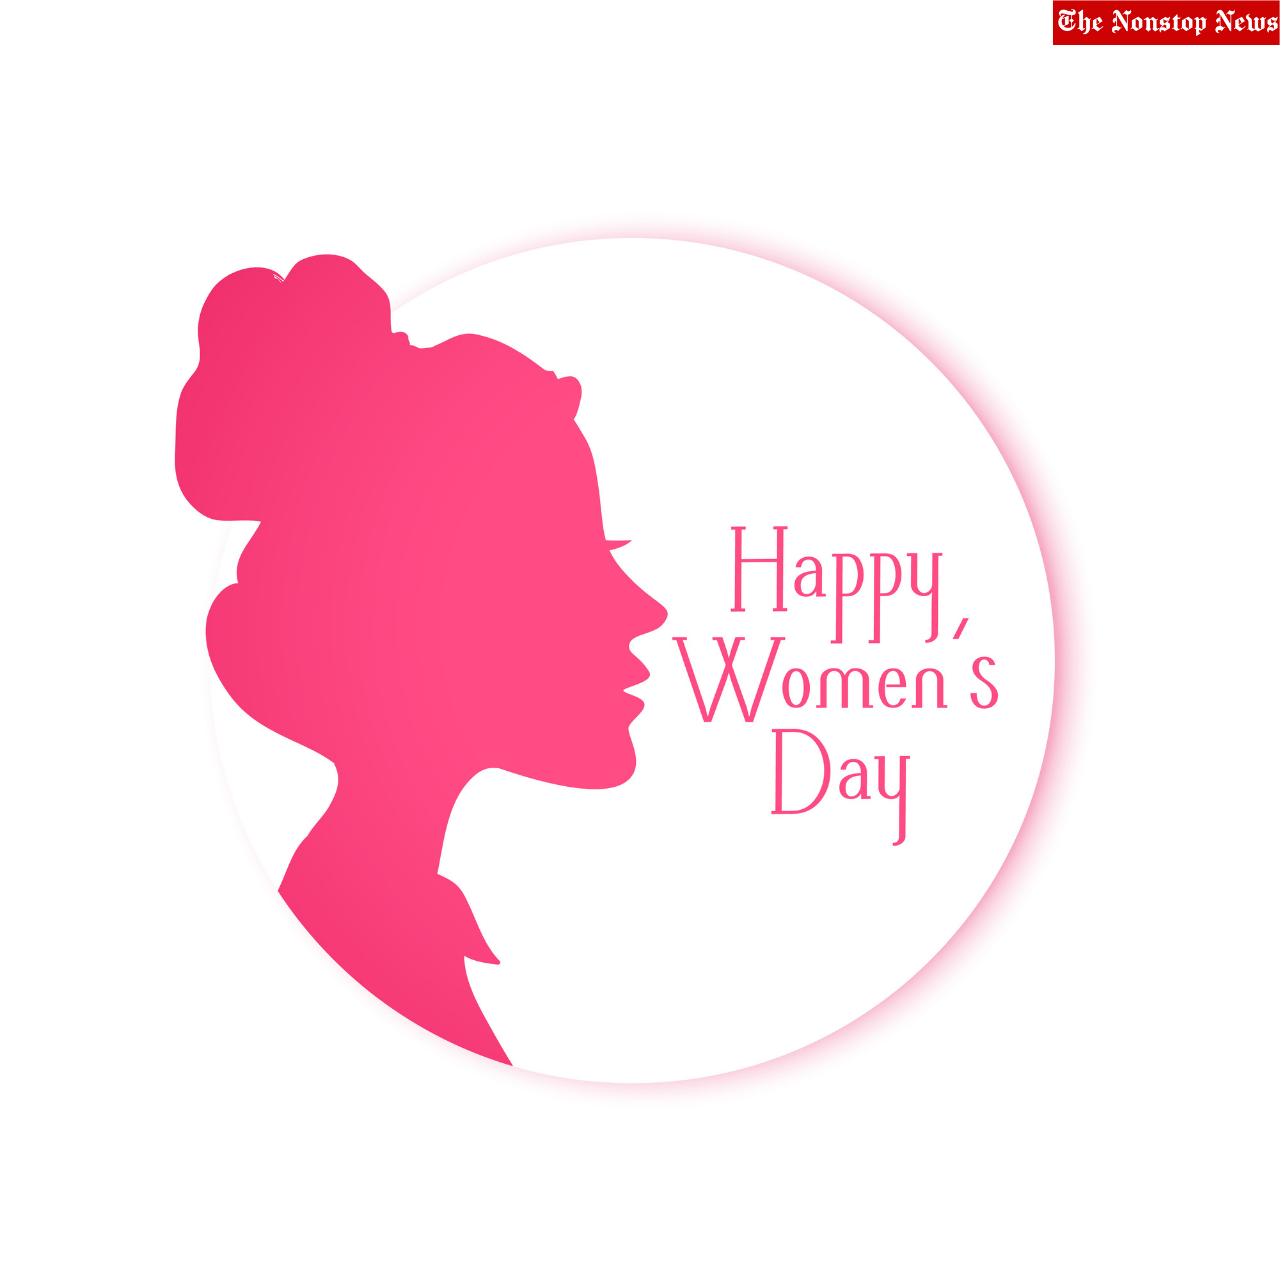 International Women's Day 2022 Slogans, Posters, HD Images, Wallpaper, WhatsApp DP, Banners to Share